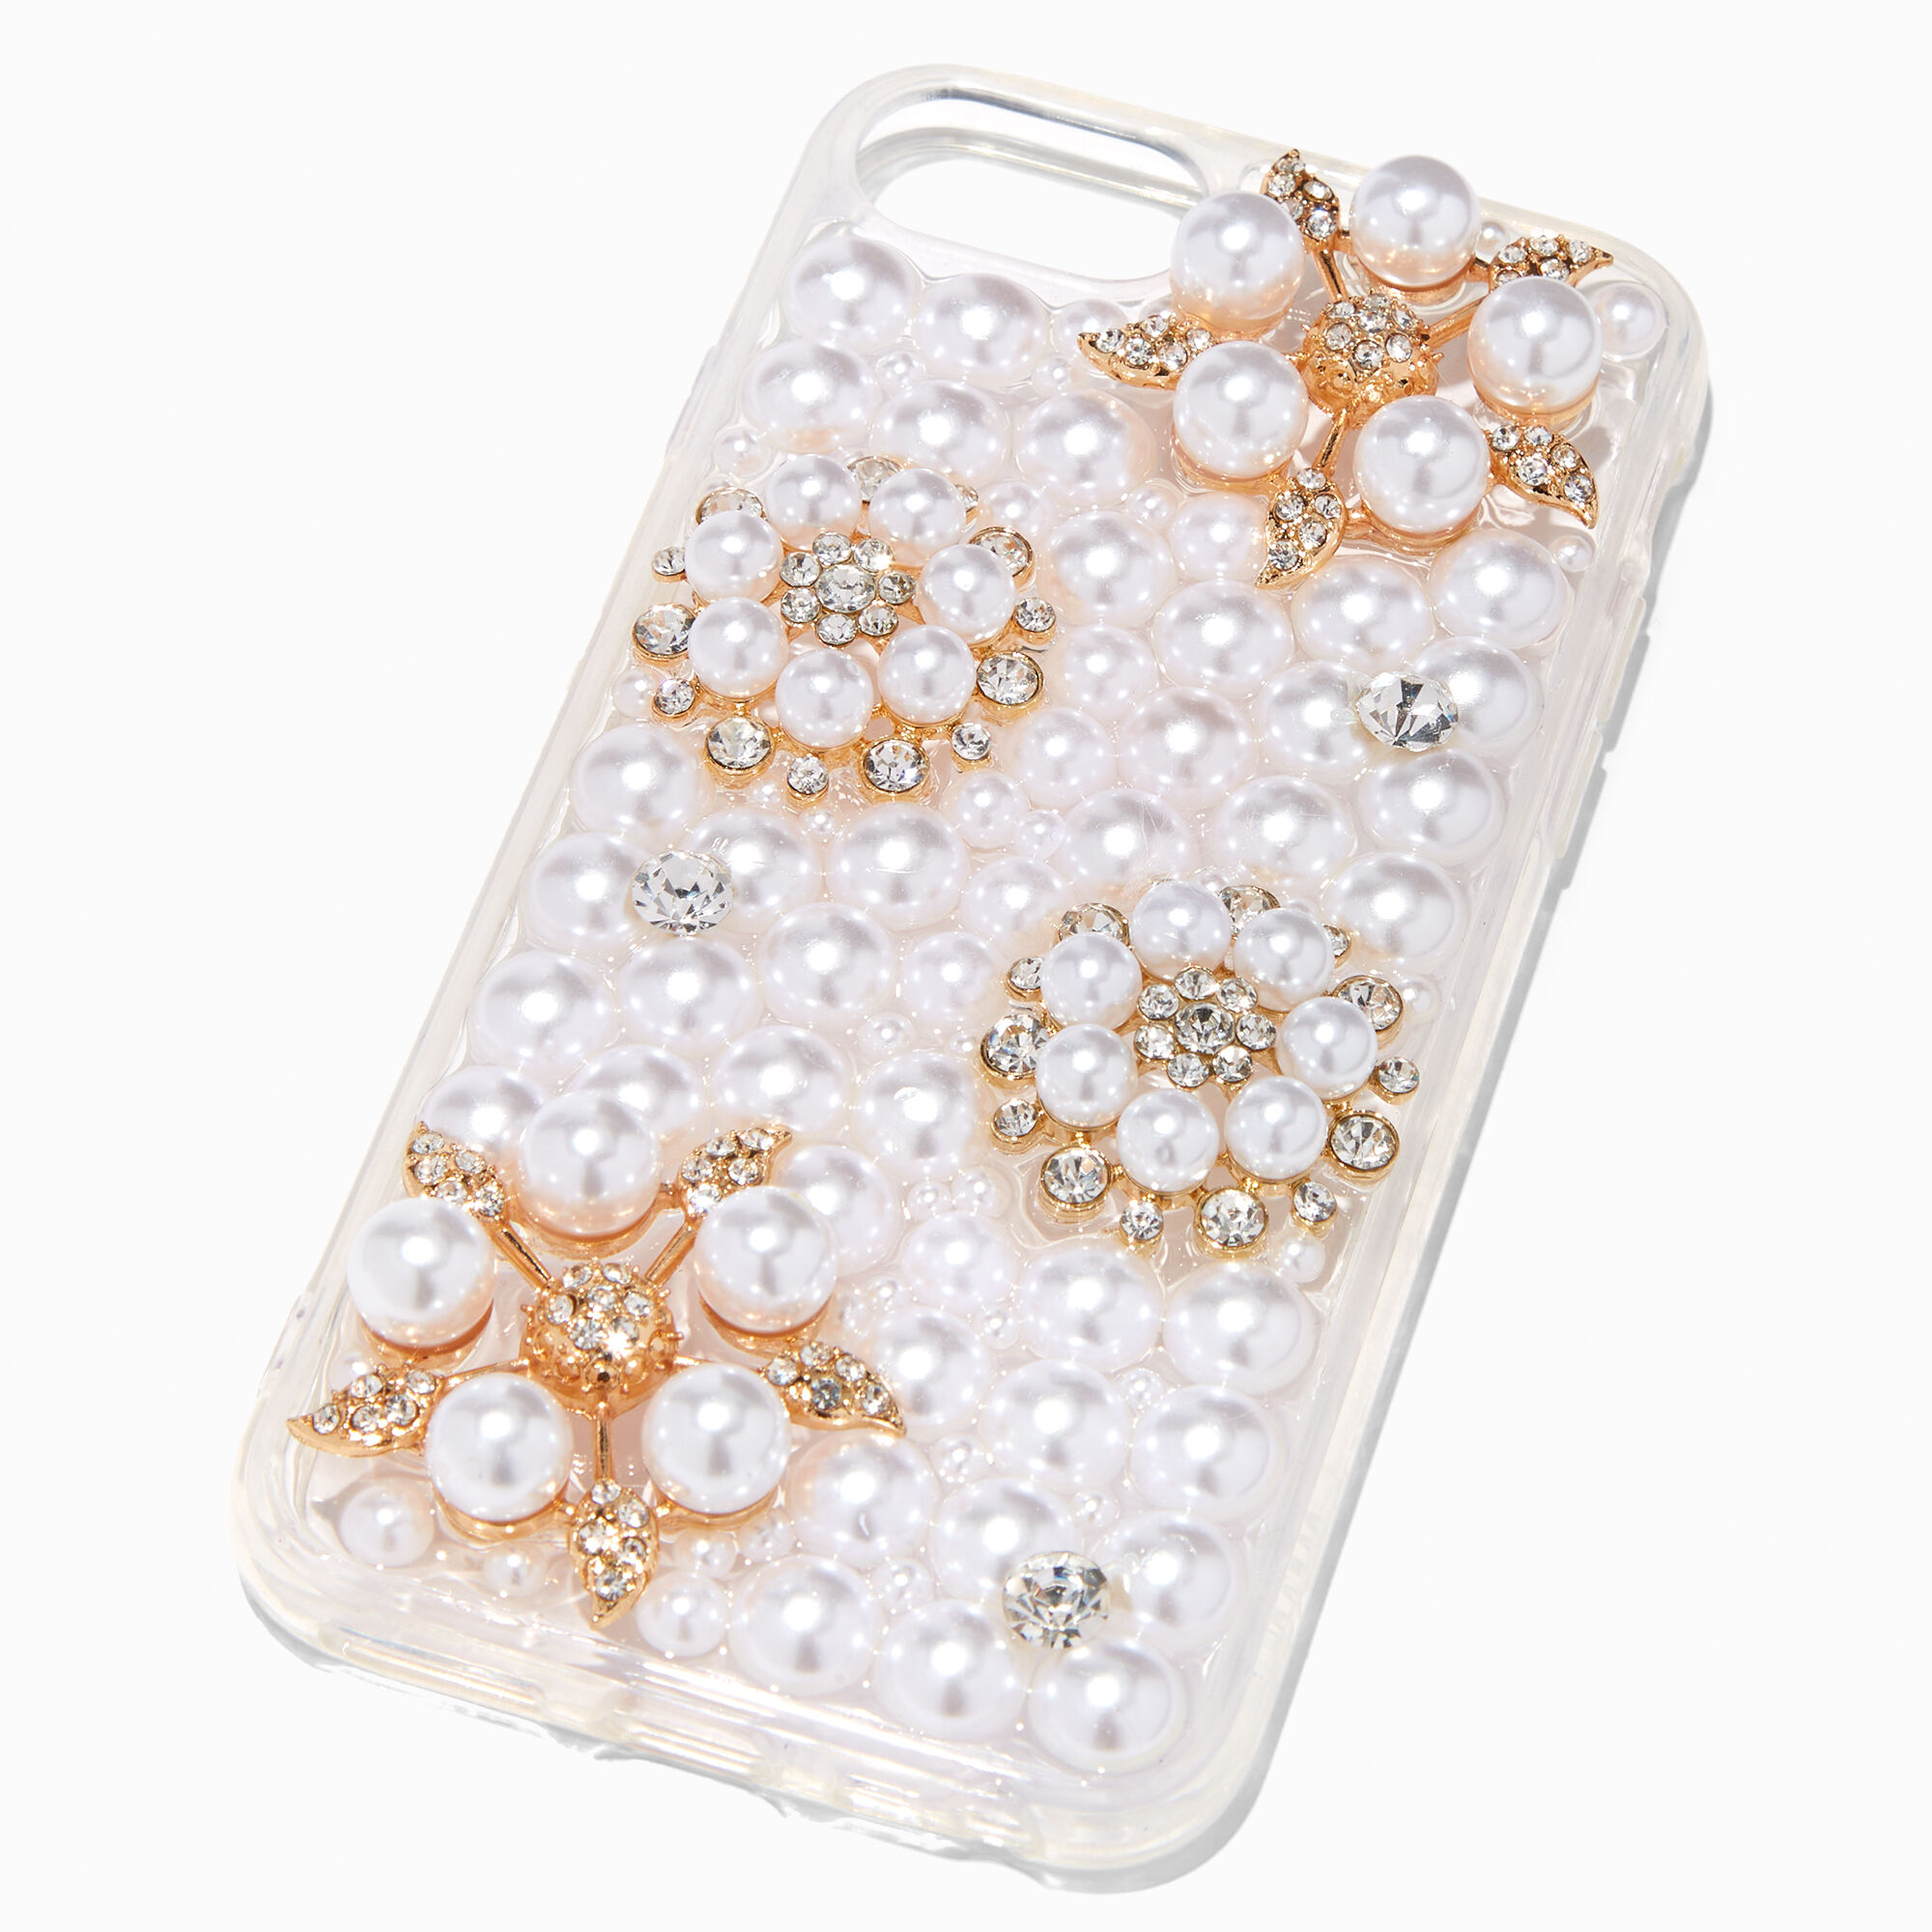 View Claires Crystal Pearl Flowers Bling Phone Case Fits Iphone 678se information